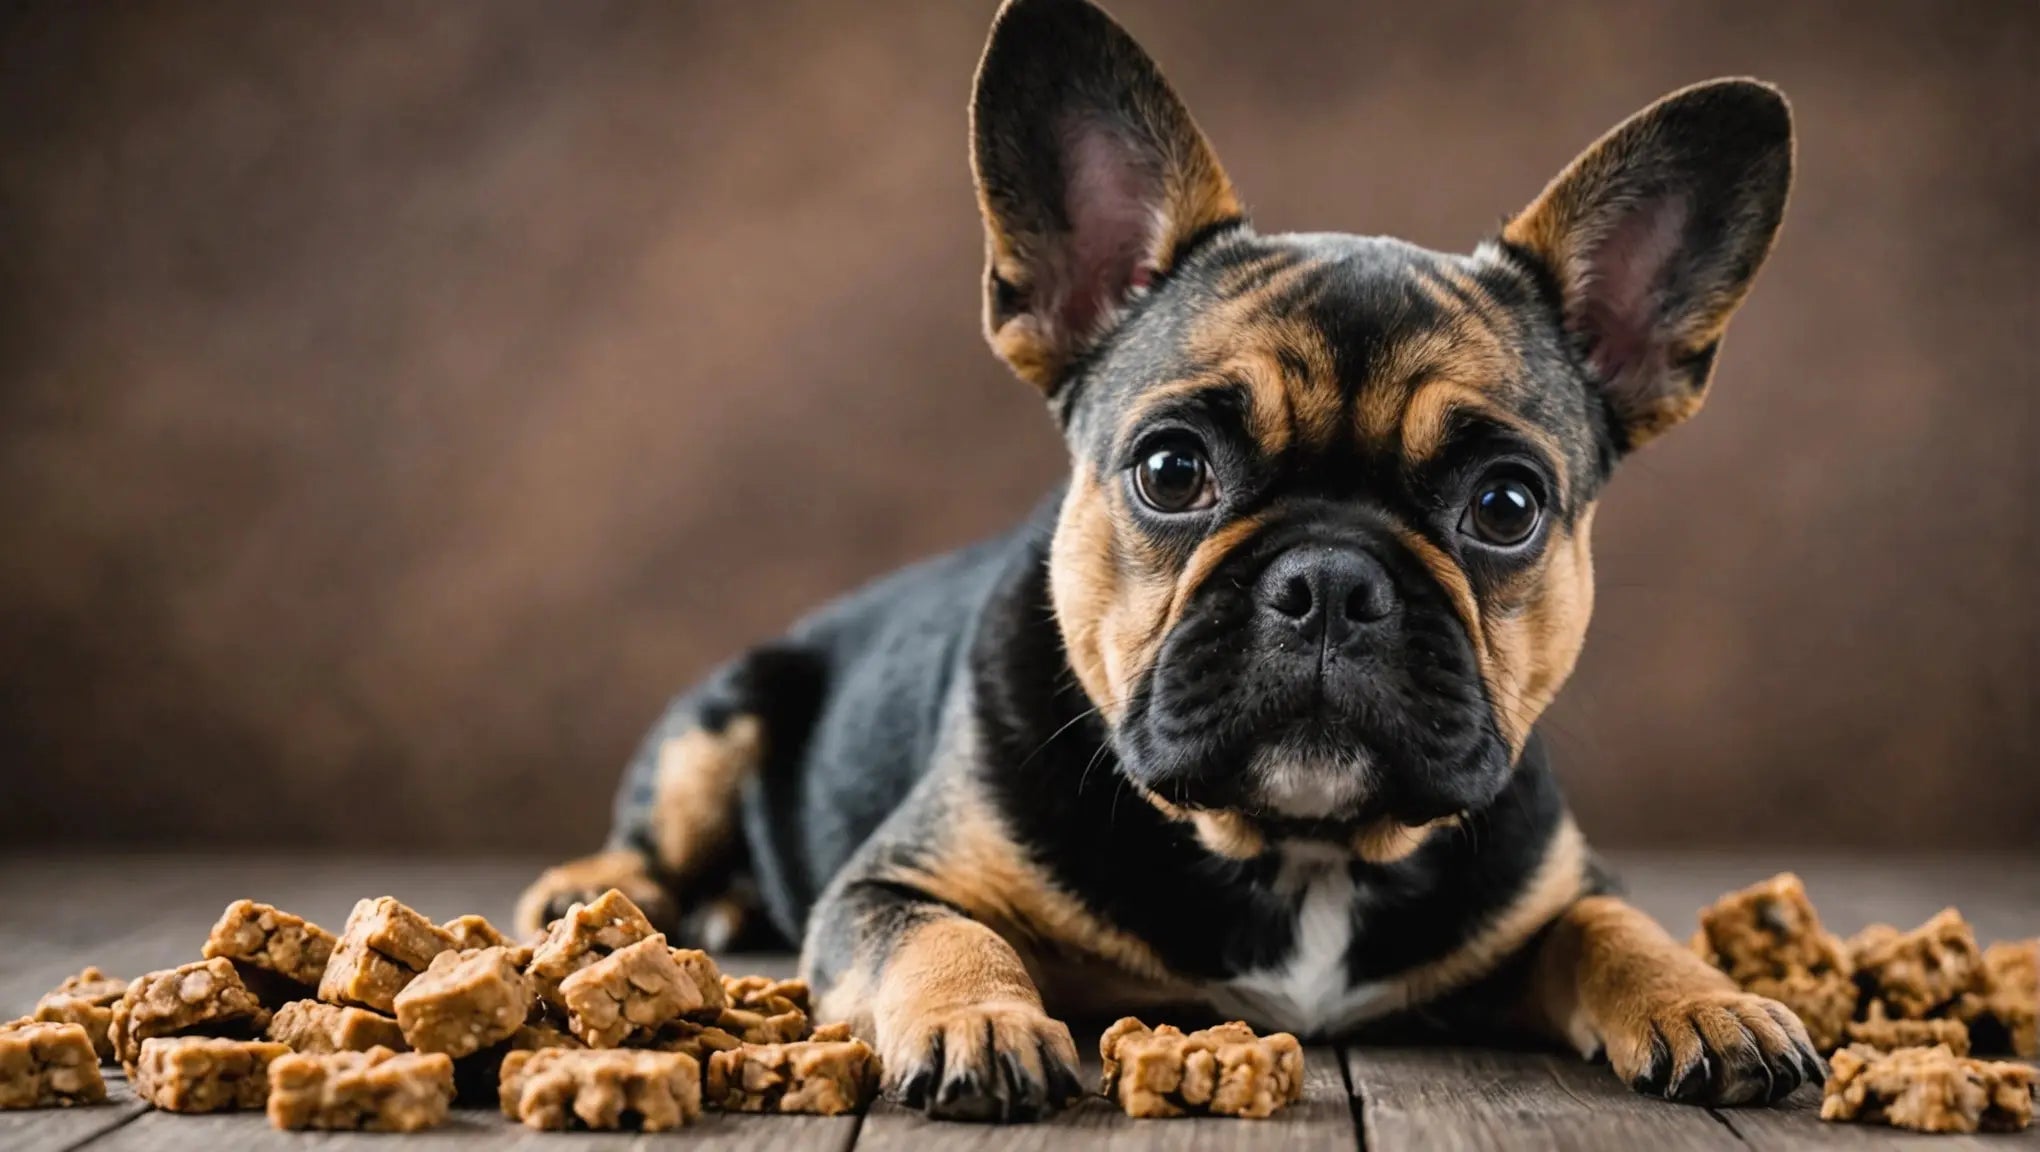 Indulge Your Pet with Delicious and Nutritious Natural Pet Treats